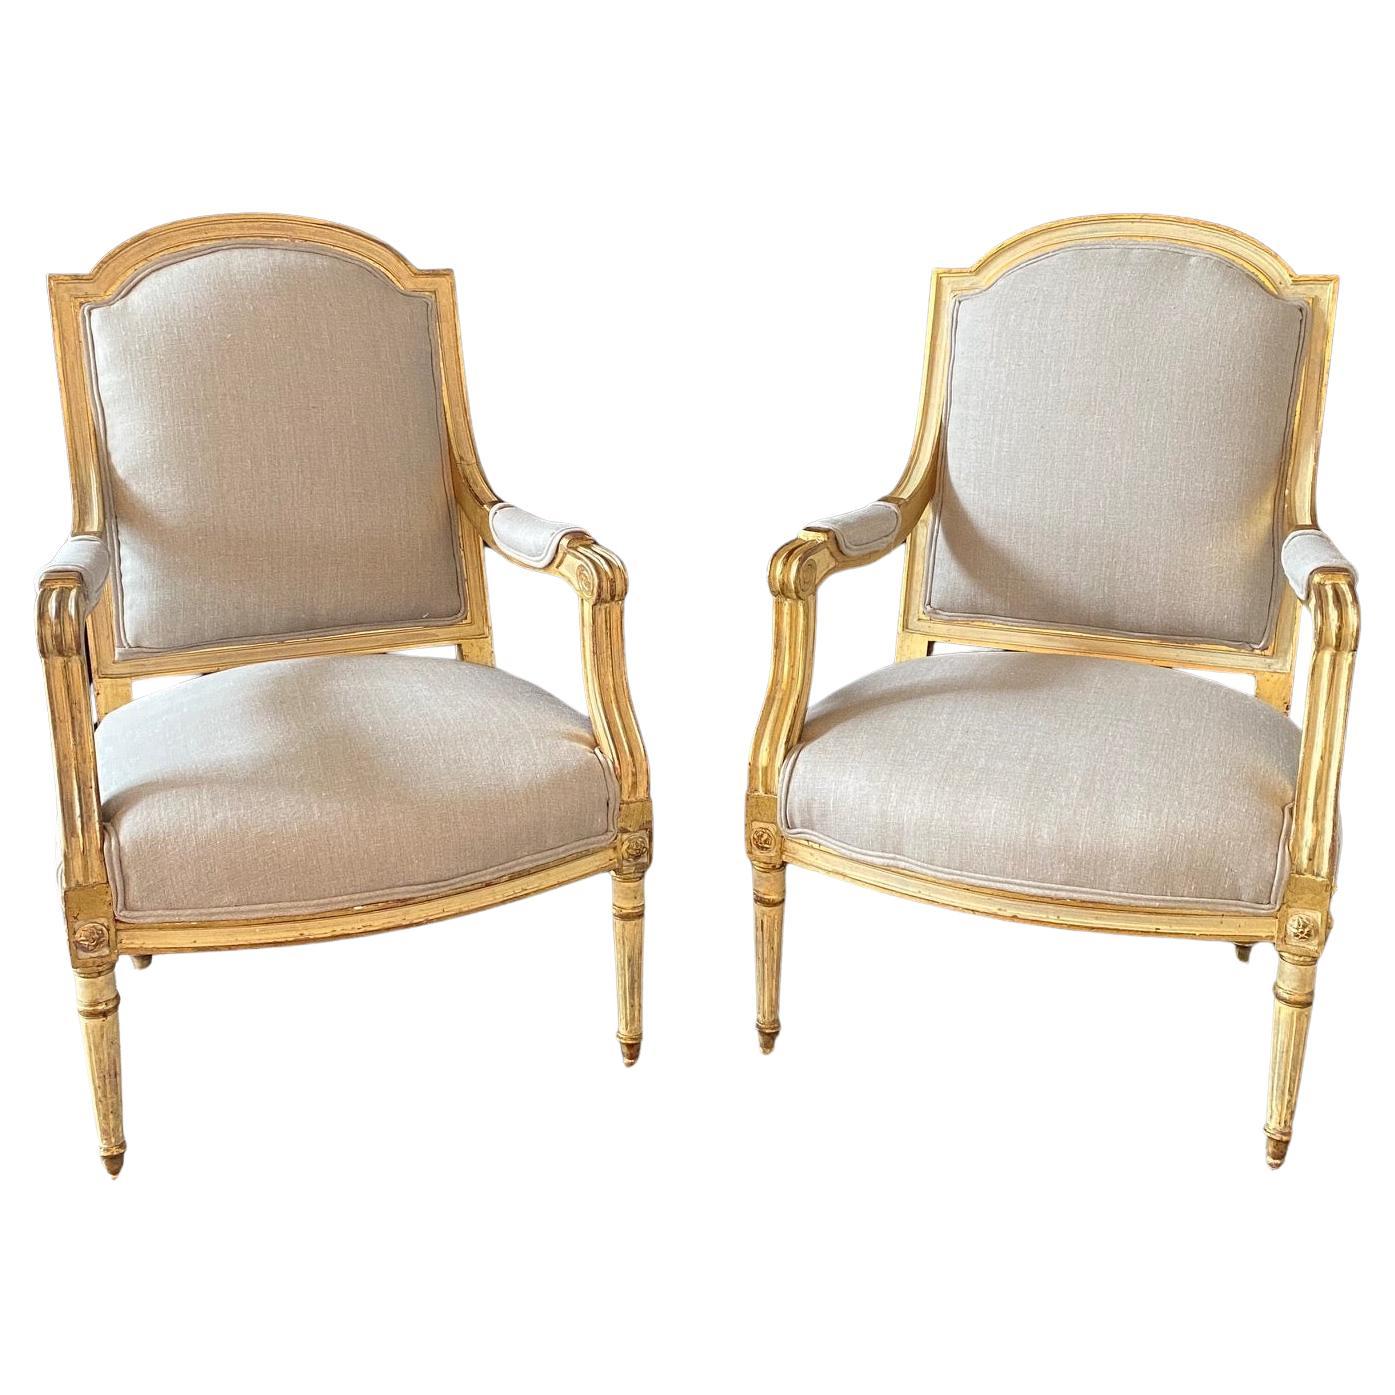 Pair of French Louis XVI Neoclassical Gold Gilt Painted Armchairs